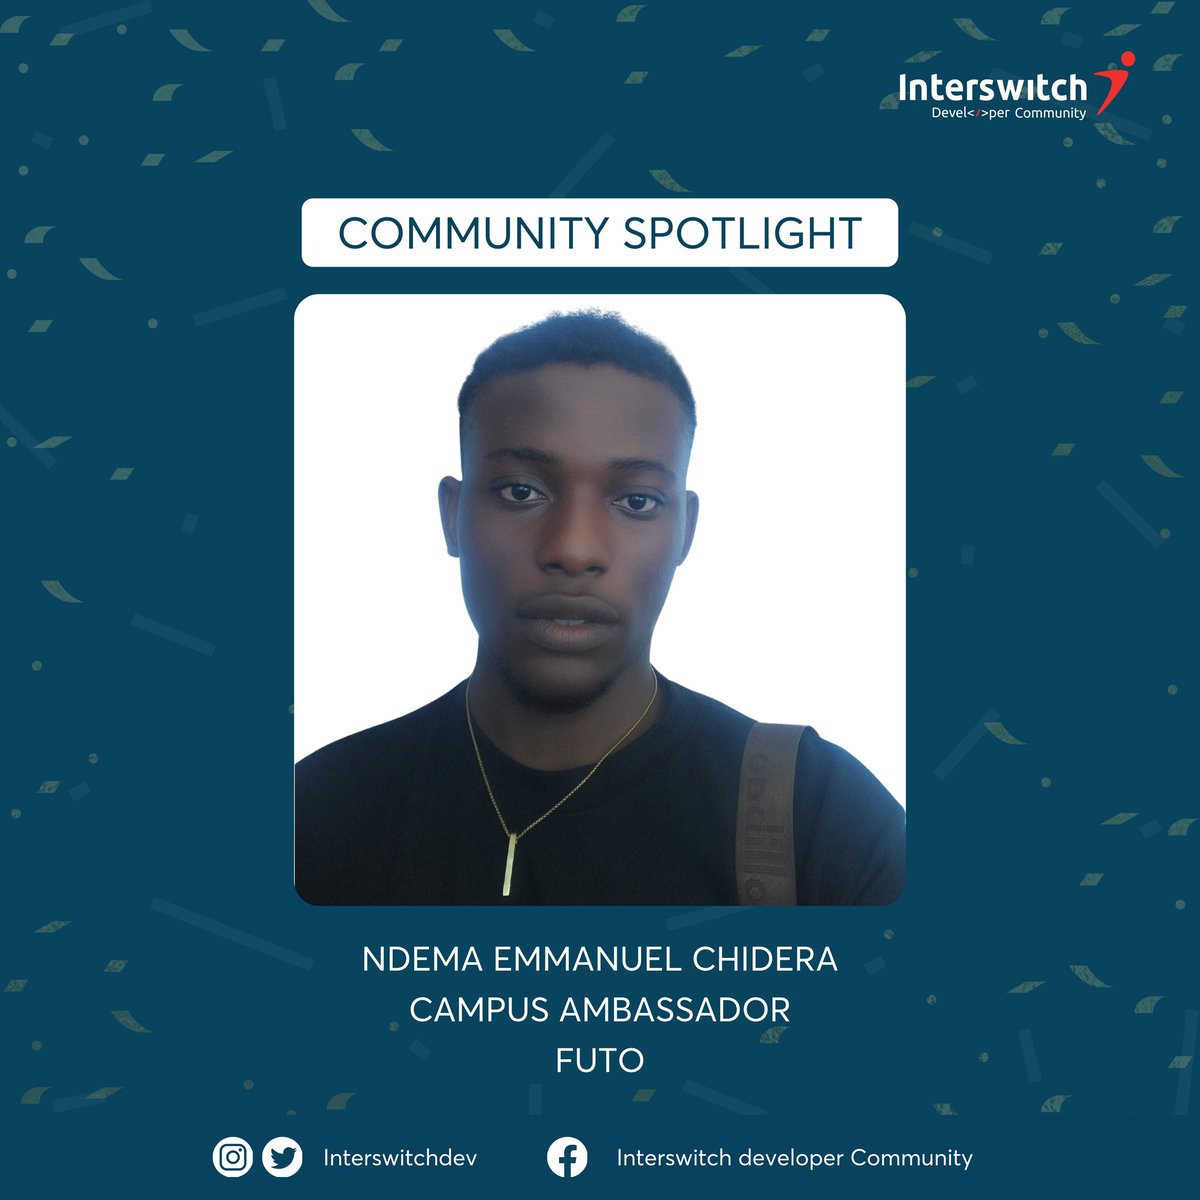 This week's IDC Community Spotlight features Ndena Emmanuel Chidera, @EmmanuelNdema1 a motivated 4th-year Electrical and Electronics Engineering student at FUTO with a passion for full-stack development! 

He is also an Interswitch Campus Ambassador, equipped with leadership